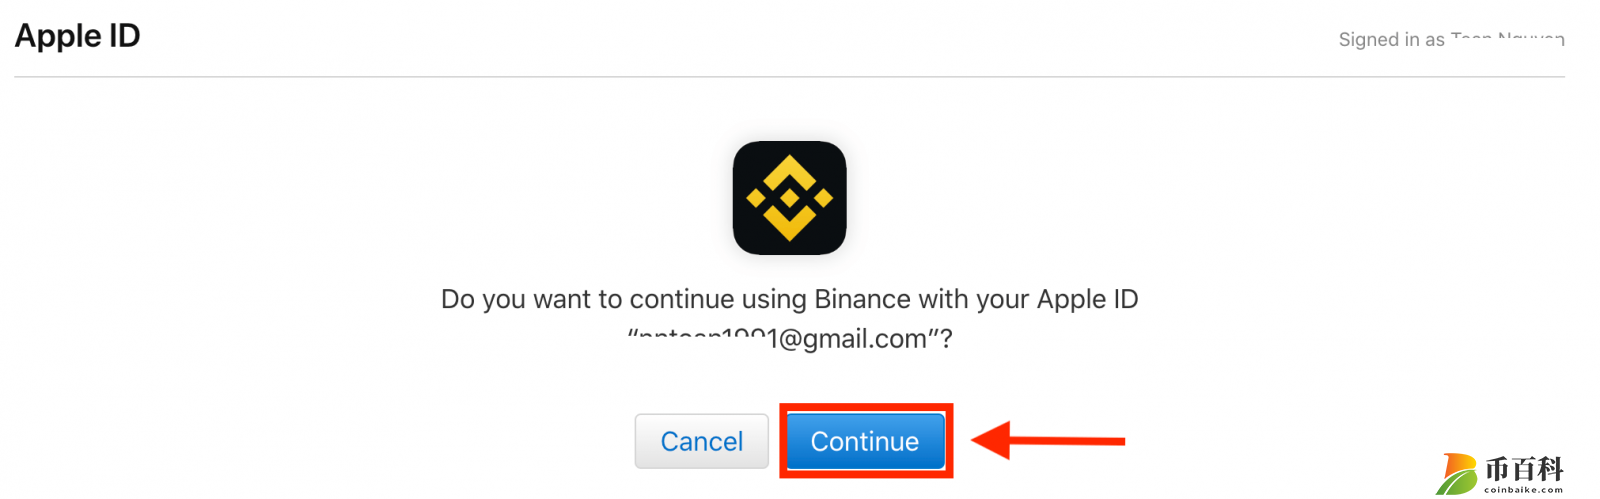 30ad47bcc2b50ee1676af38436964f2d_how-to-register-and-login-account-on-binance-1685104028-16.png